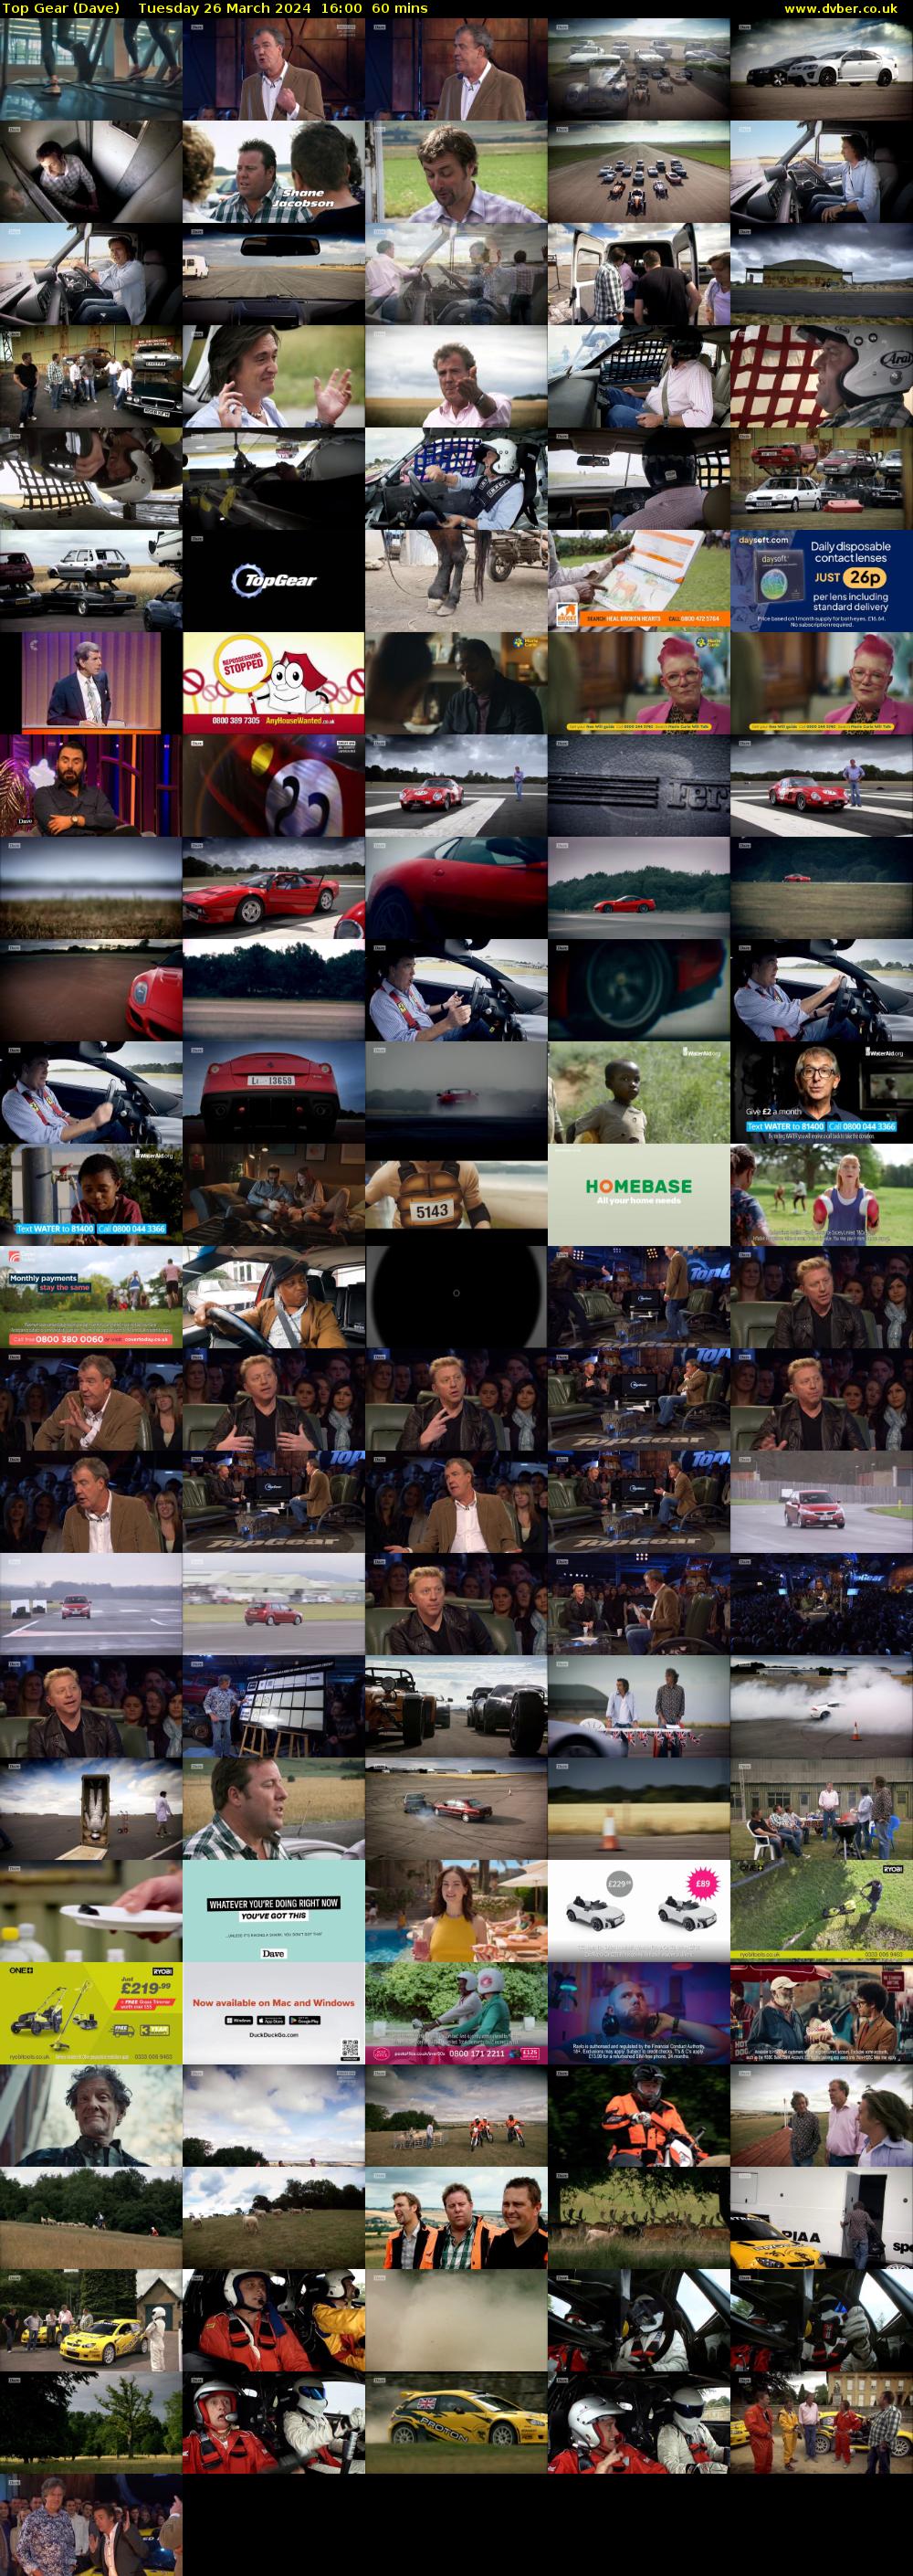 Top Gear (Dave) Tuesday 26 March 2024 16:00 - 17:00